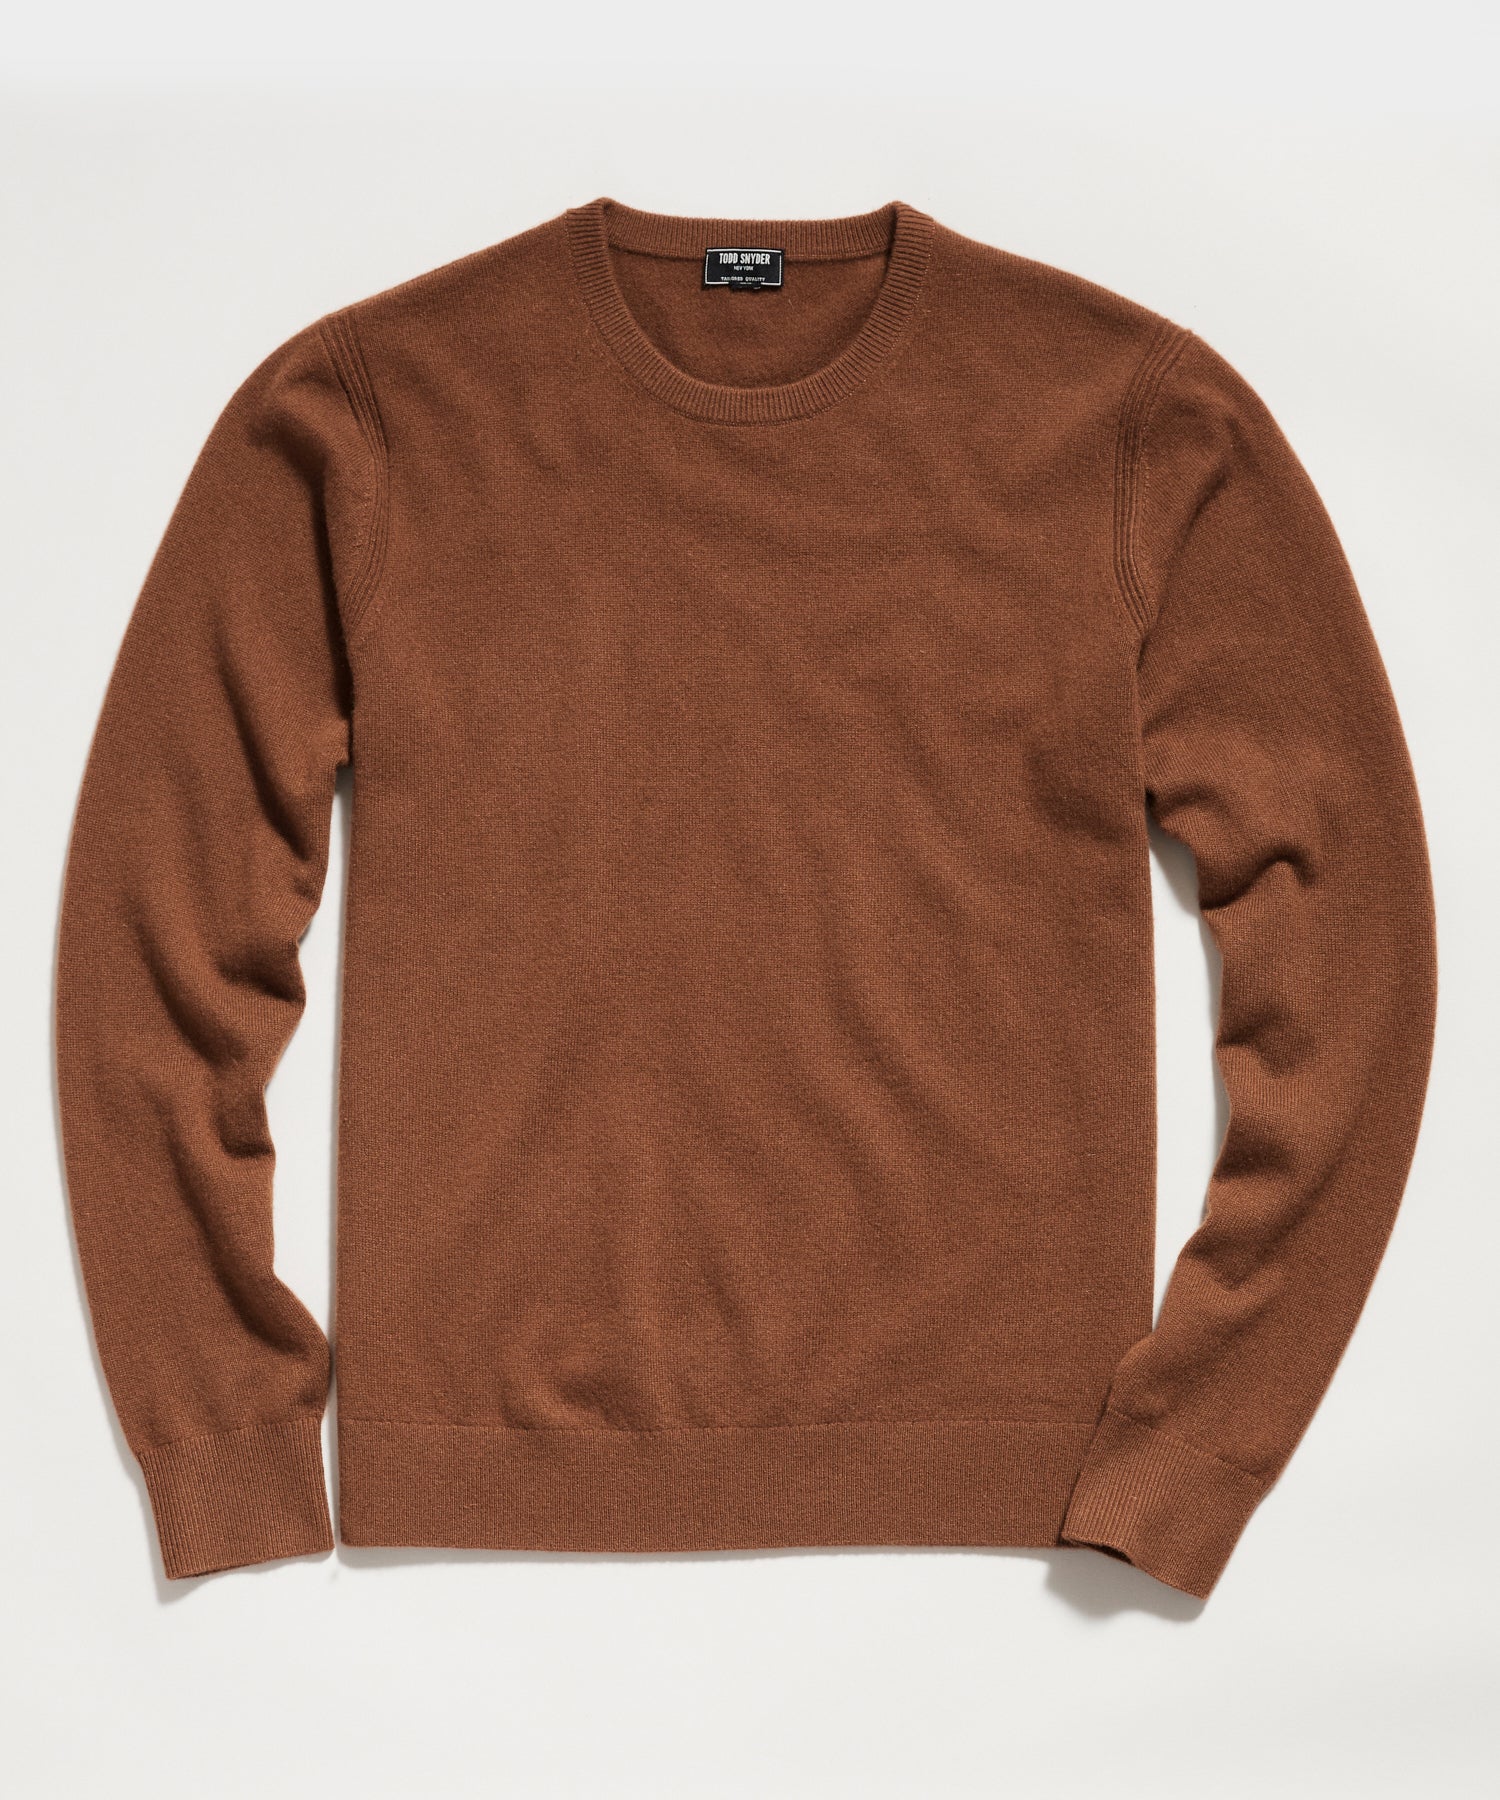 Cashmere Crewneck in Toasted Coconut